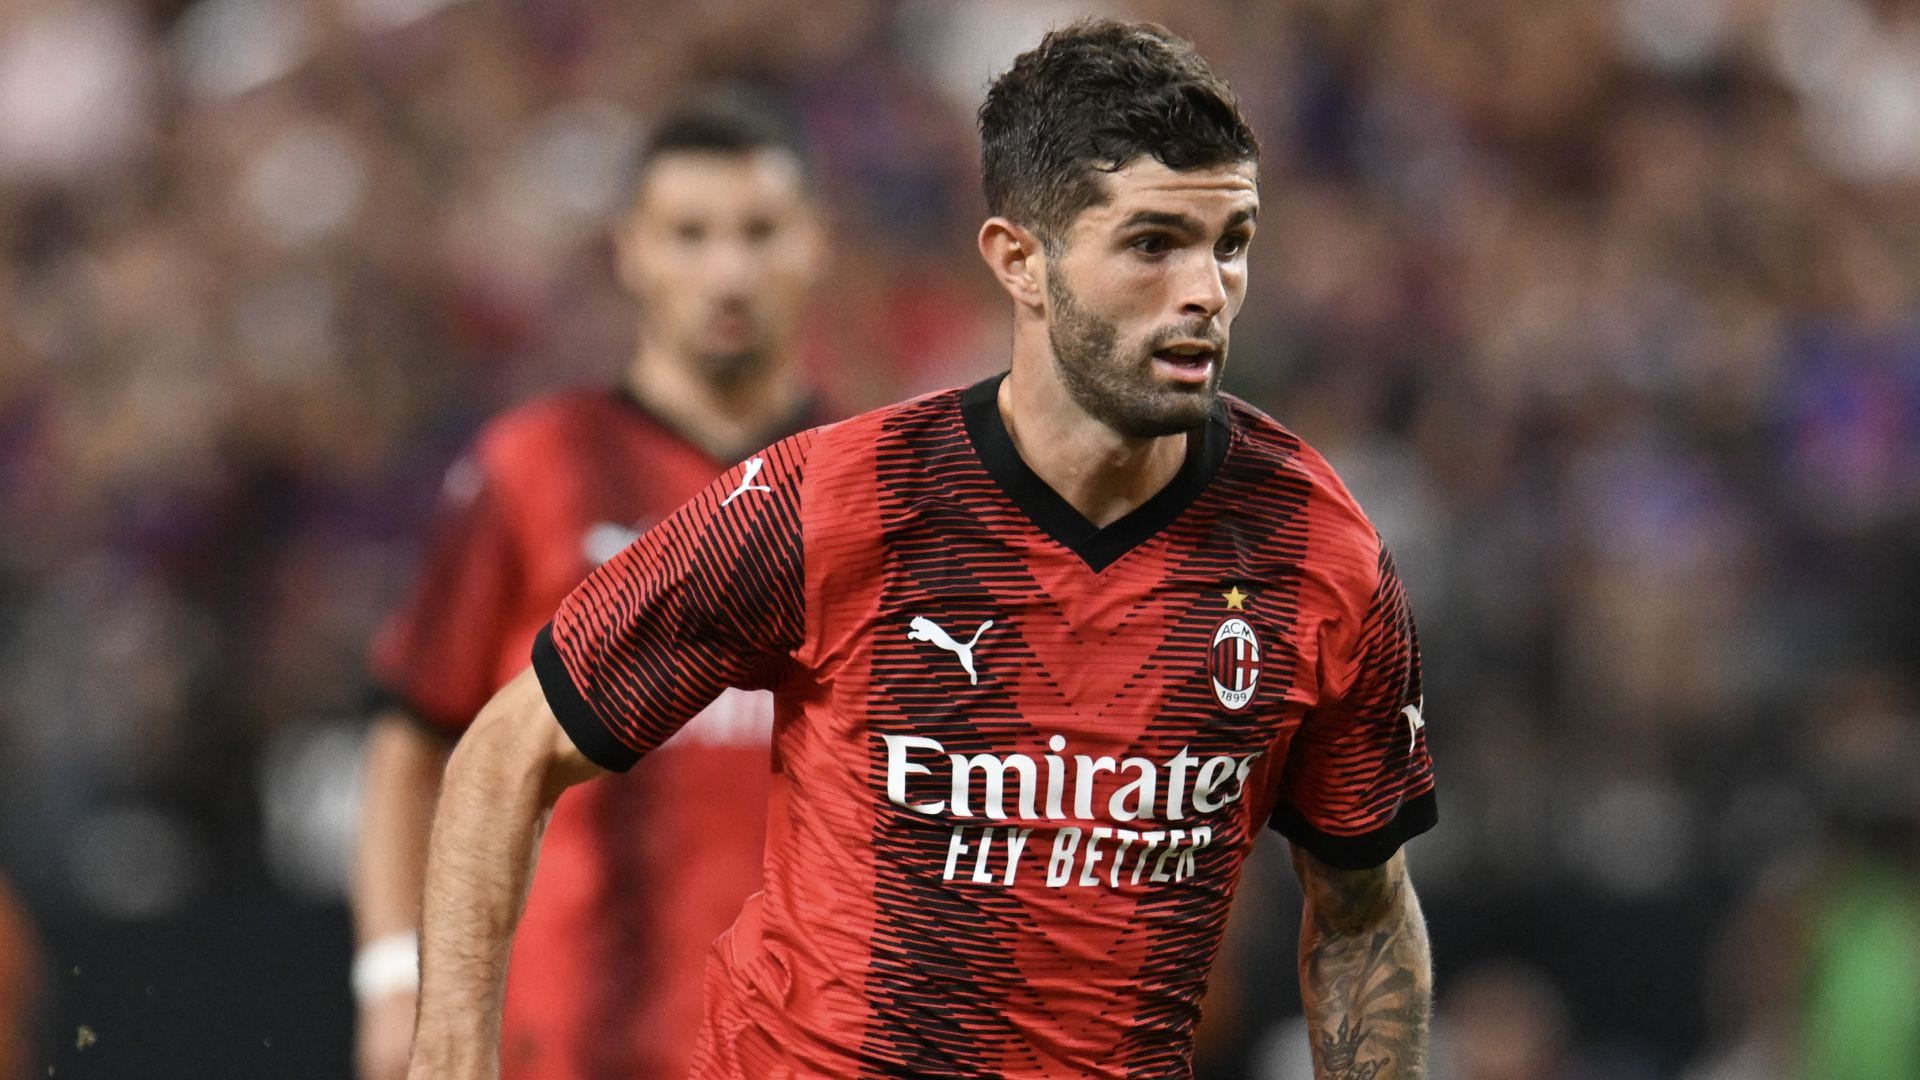 AC Milan vs Trento Live stream, TV channel, kick-off time and where to watch Goal US